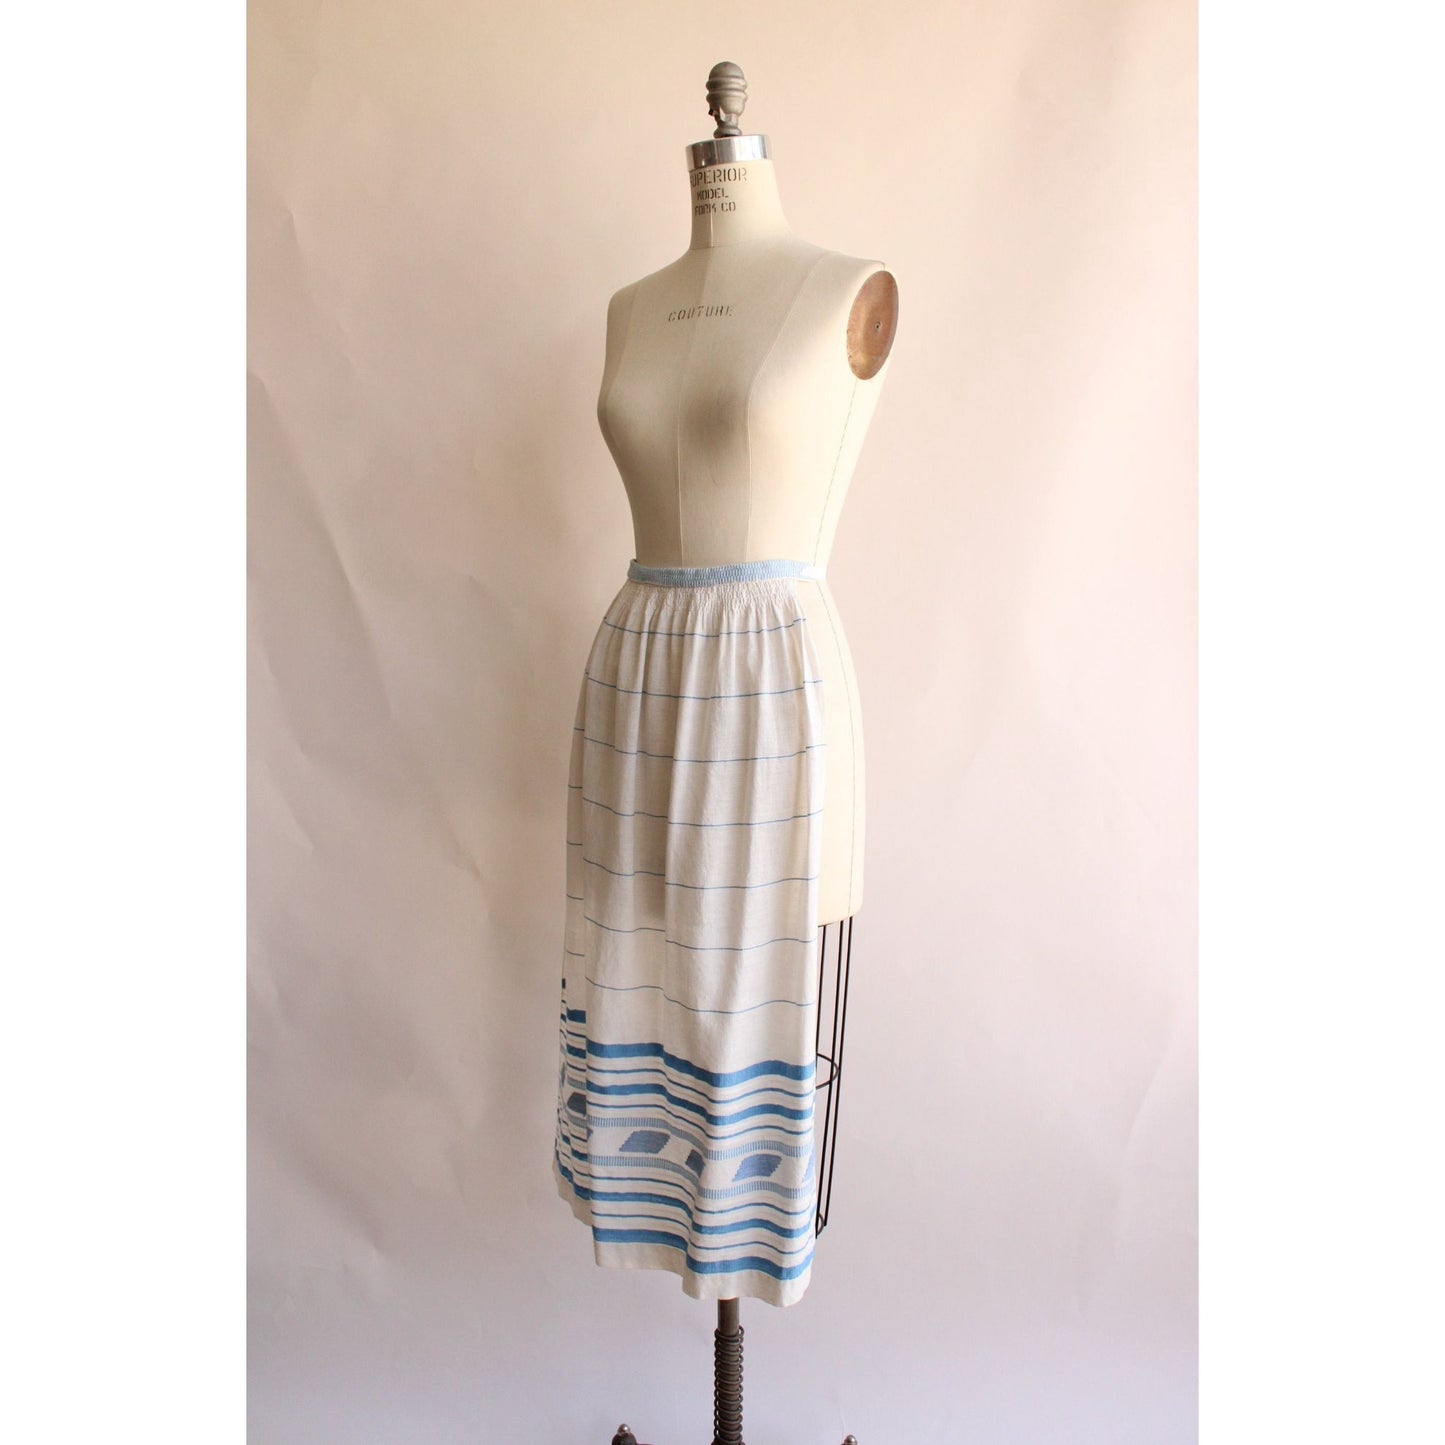 Vintage 1930s 1940s White and Blue Linen with Smocking Half Apron